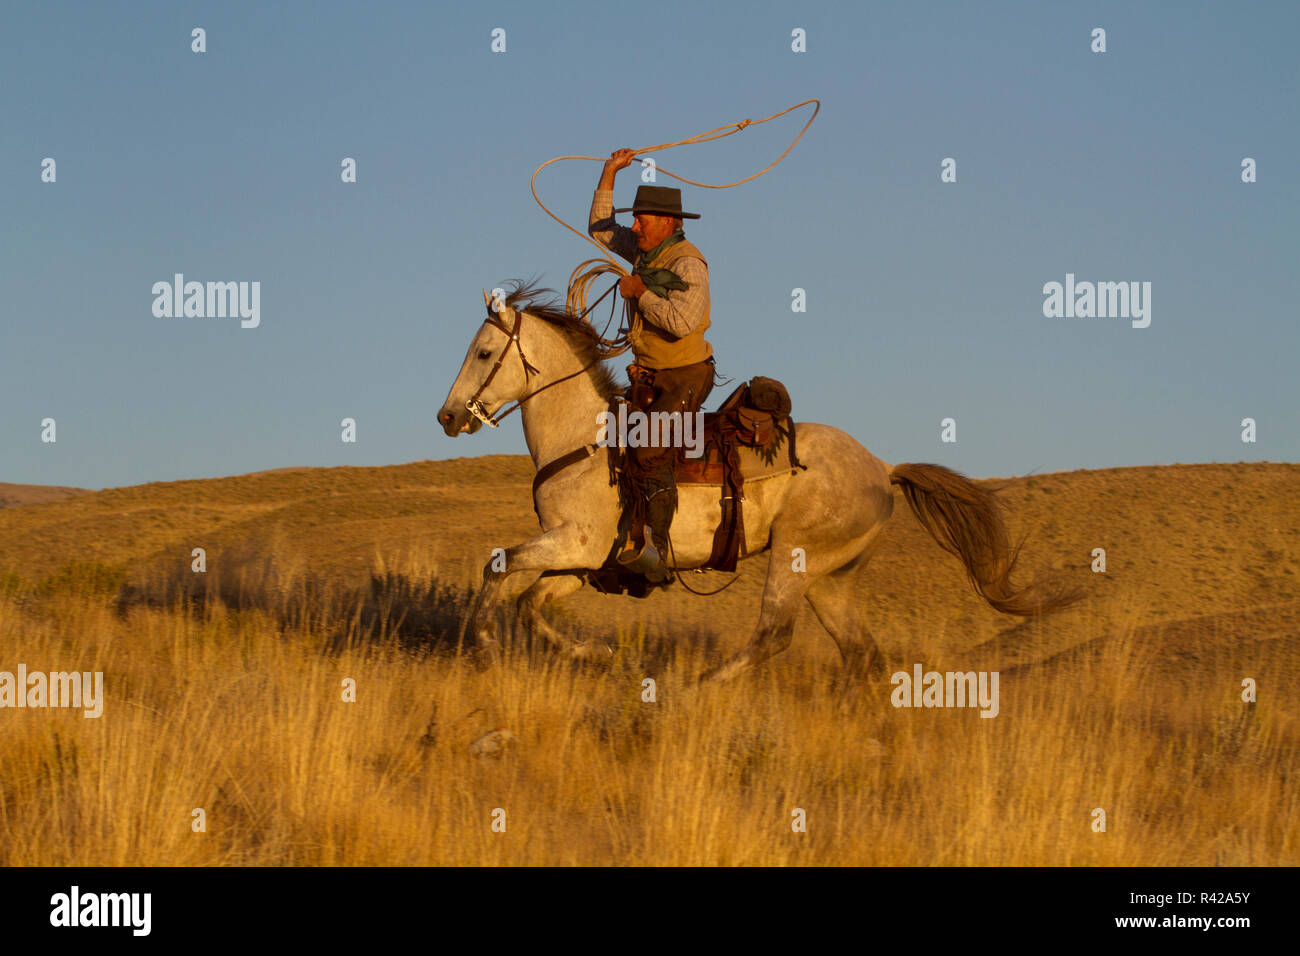 USA, Wyoming, Shell, The Hideout Ranch, Cowboy With Lasso Riding Galloping Horse in Golden Light at End of Day (MR, PR) Stock Photo